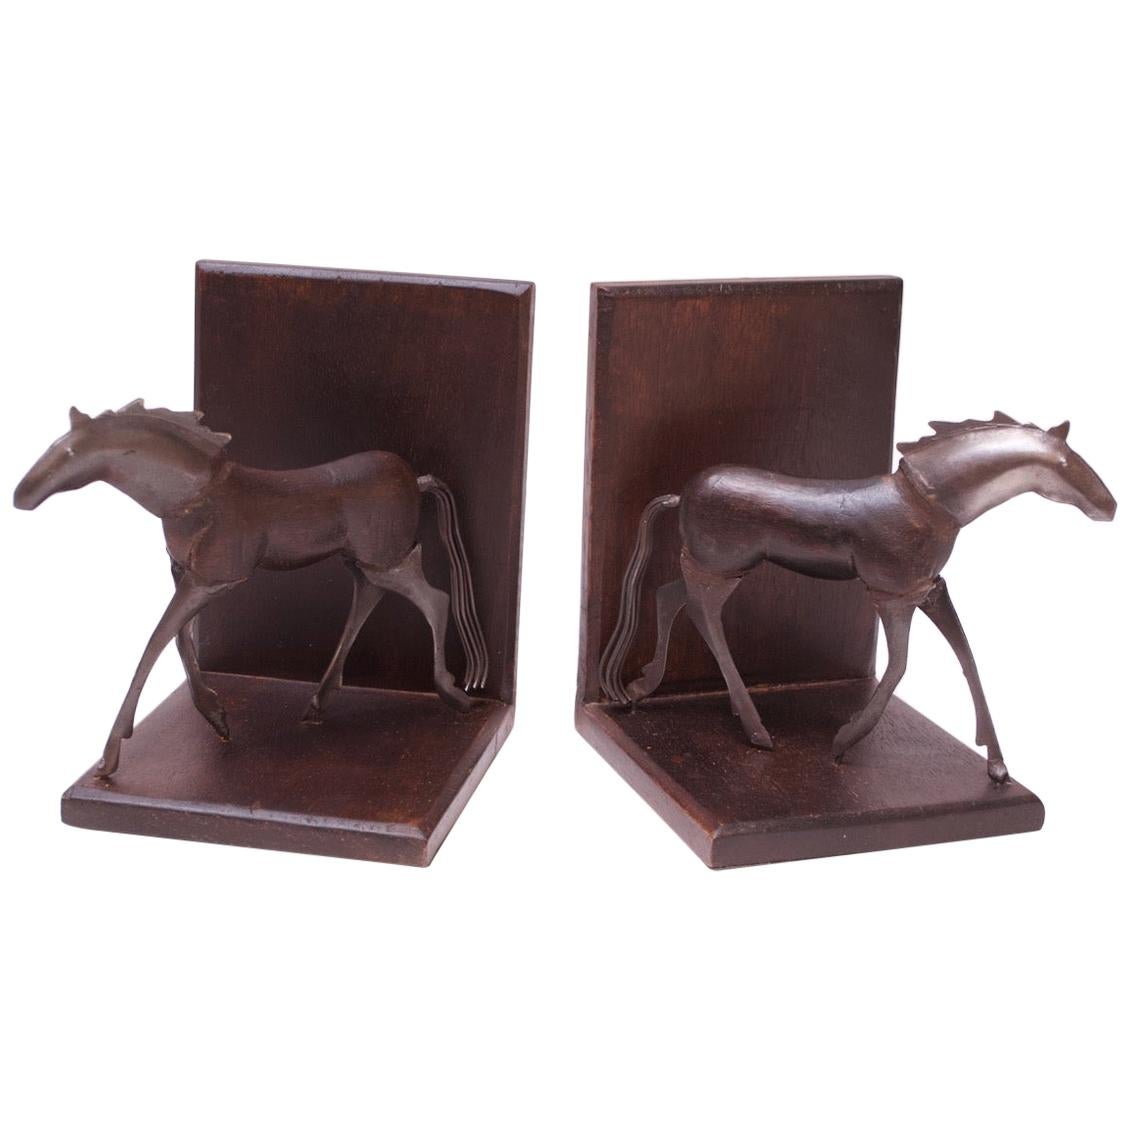 Brutalist Metal and Wood Horse Bookends